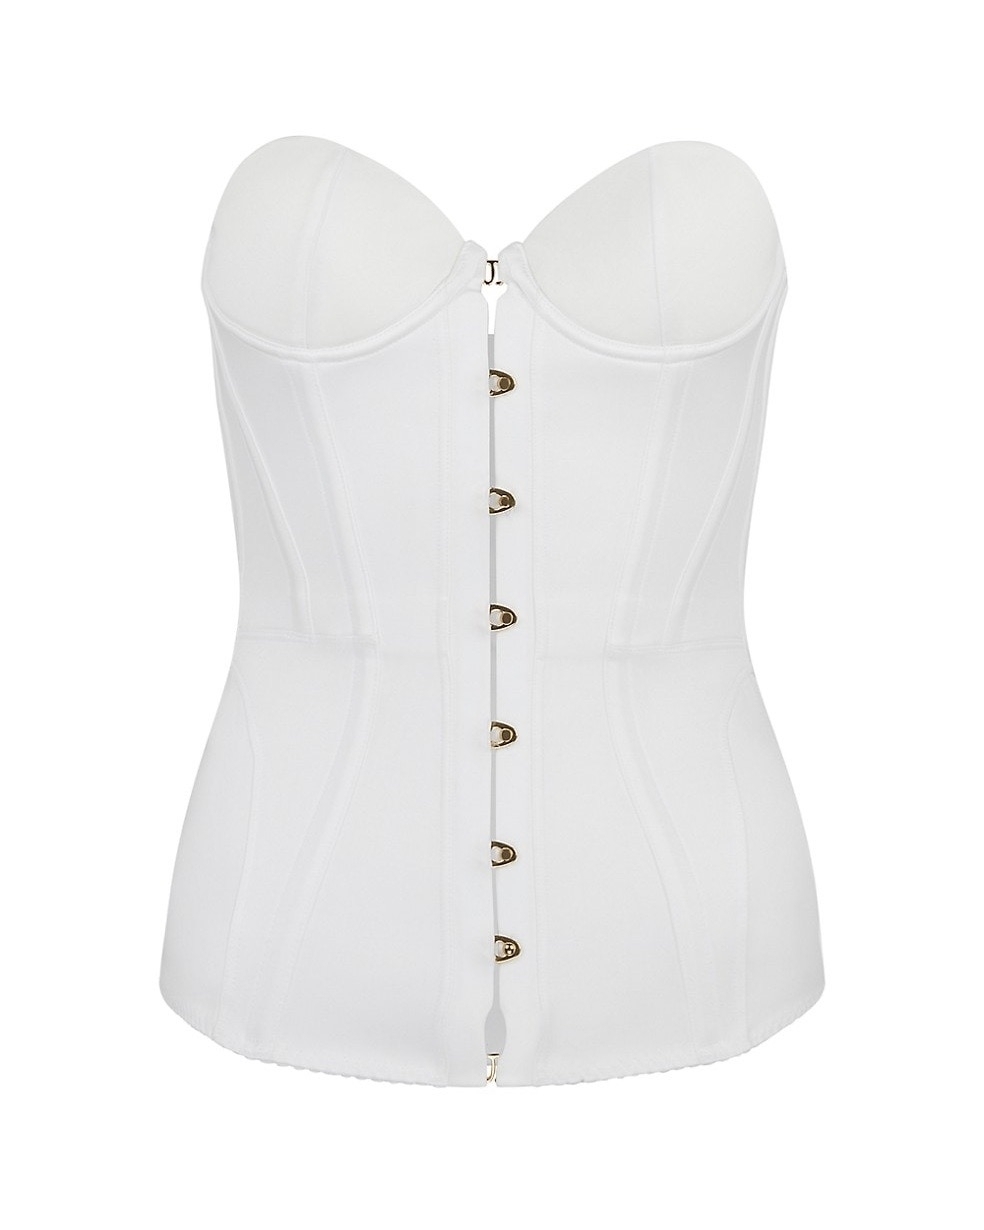 Best Shapewear for Wedding Dress, Top Undergarments For Bridal Gowns